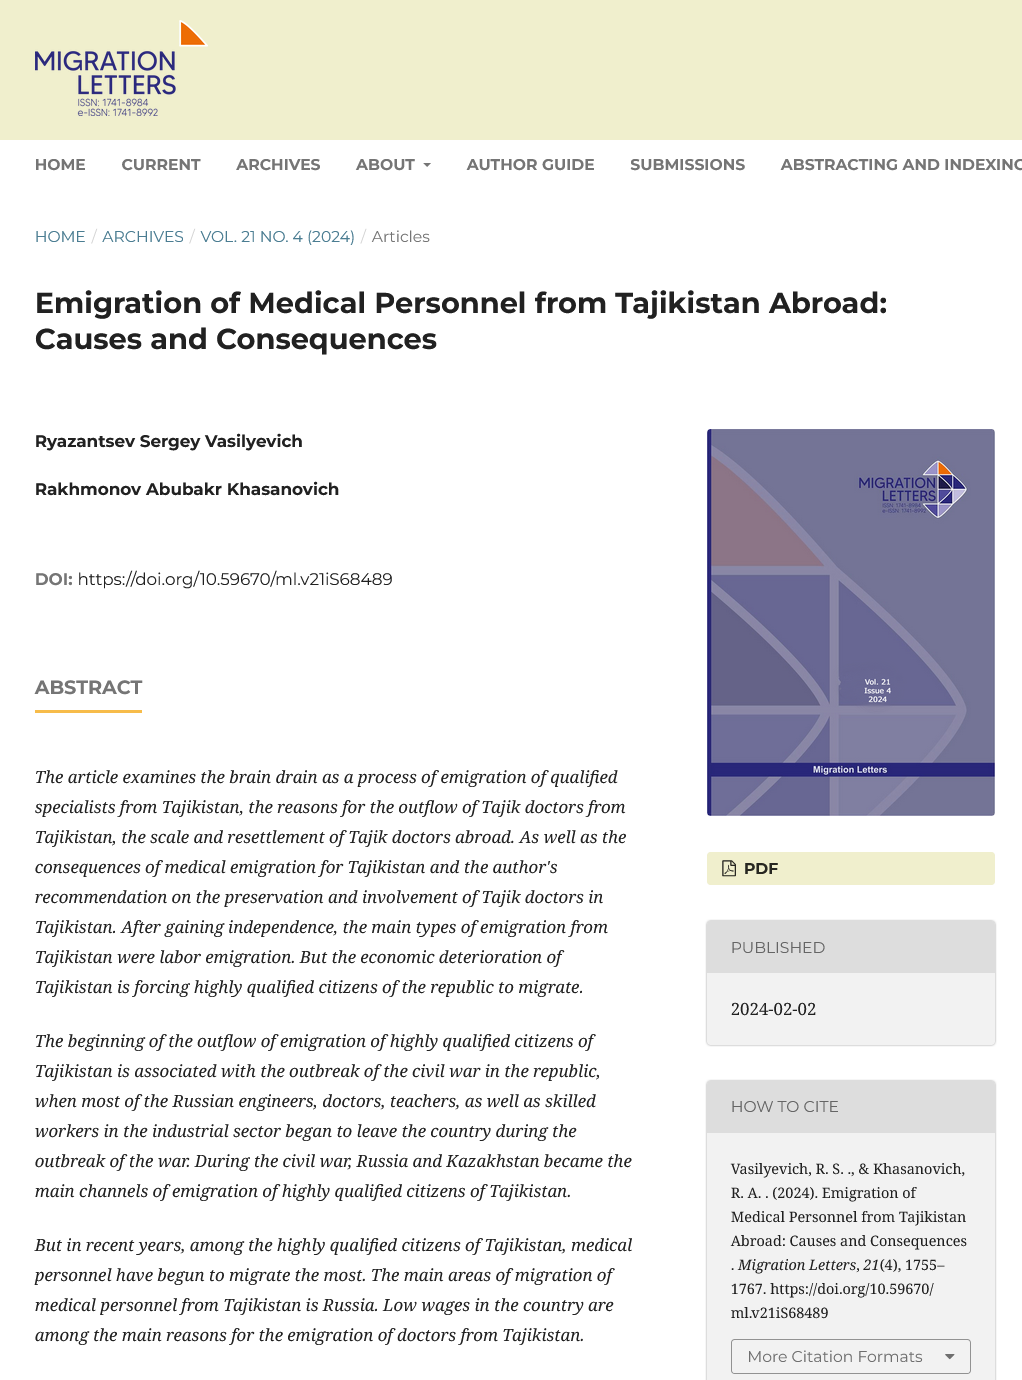 Emigration of Medical Personnel from Tajikistan Abroad: Causes and Consequences